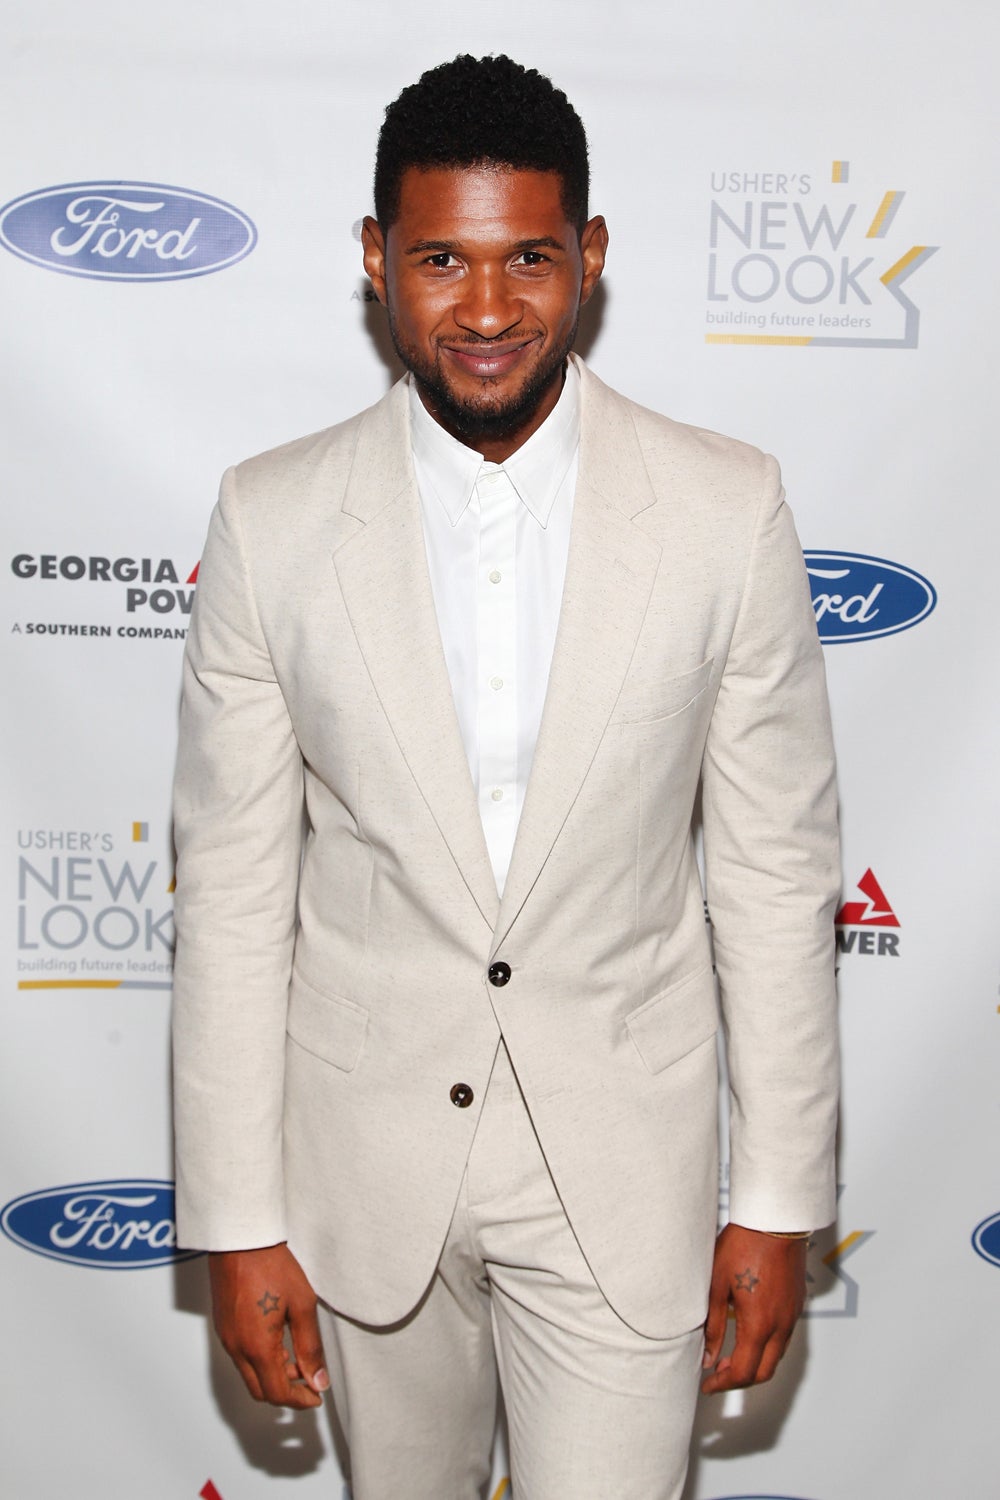 Usher Publicly Thanks Men Who Saved His Son’s Life